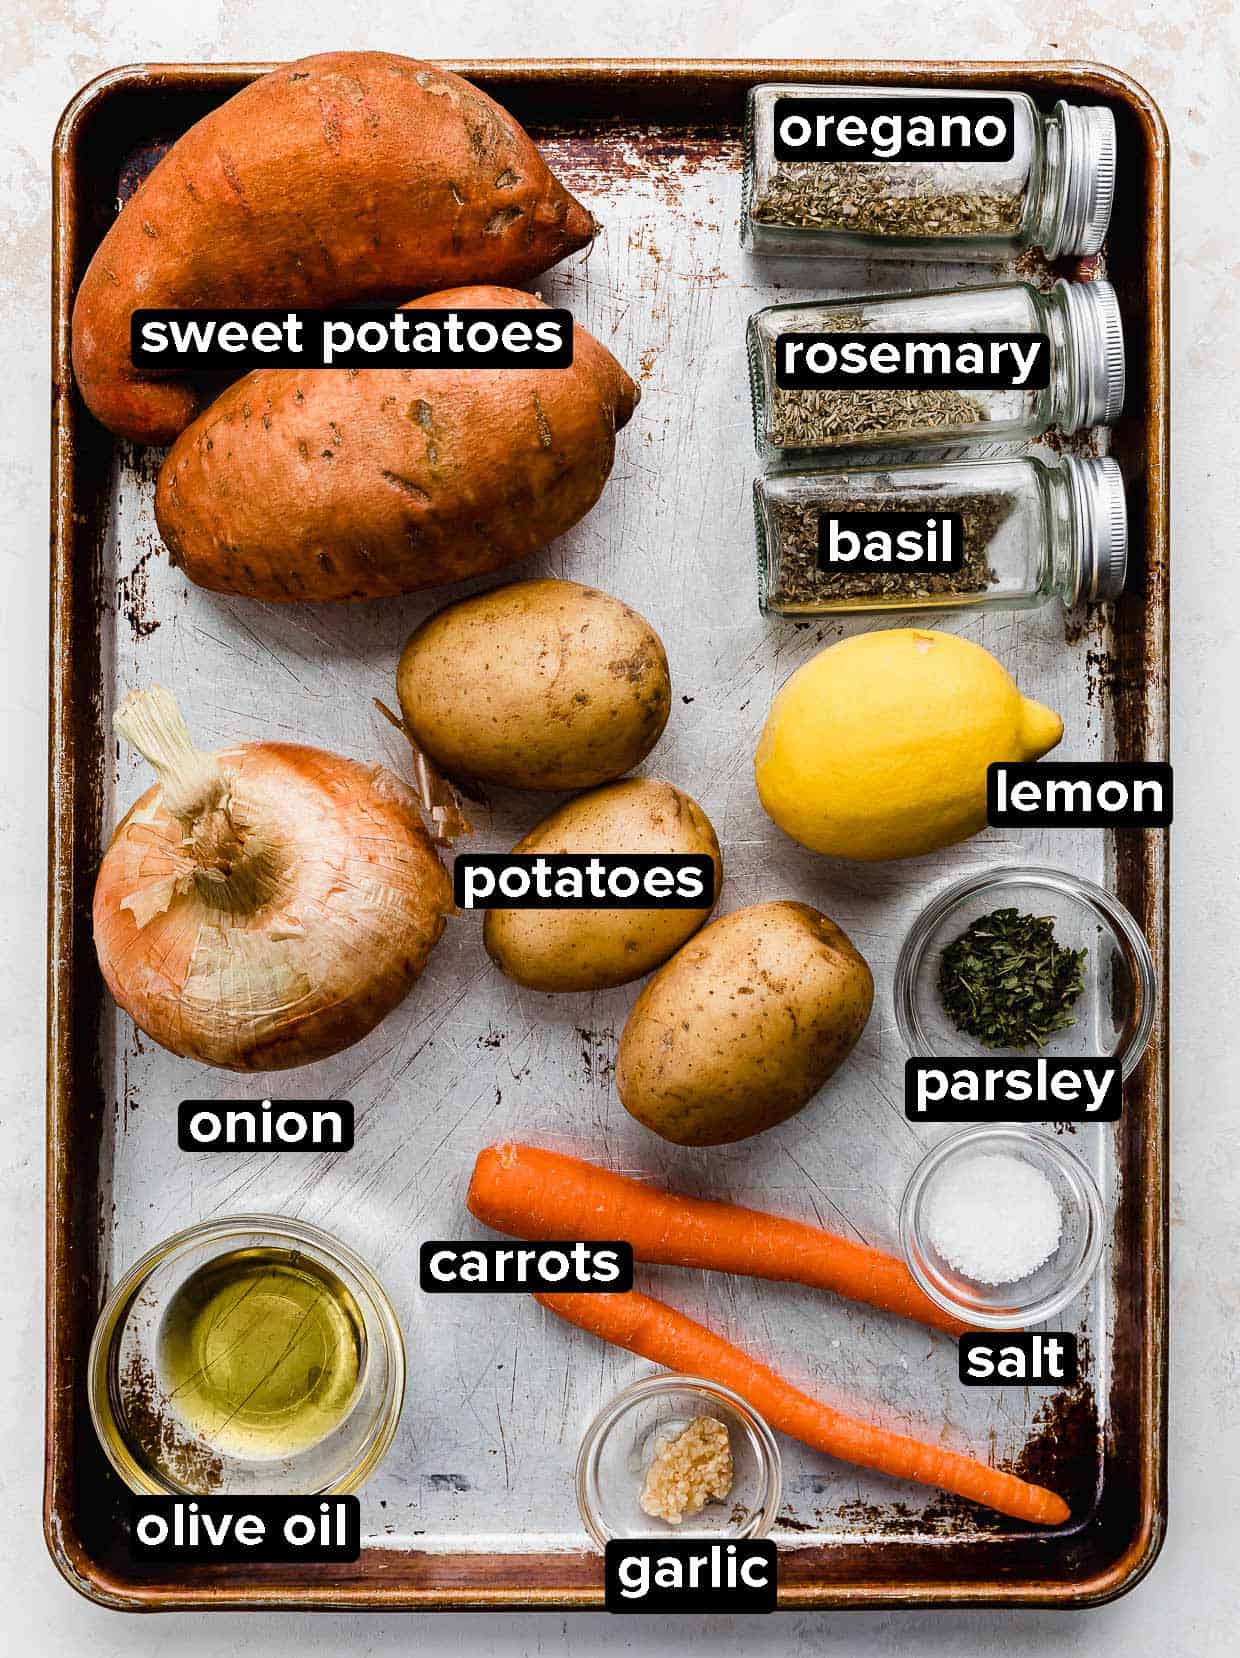 A sheet pan with ingredients used to make roasted root vegetables: sweet potato, potatoes, onion, carrots, and seasonings.